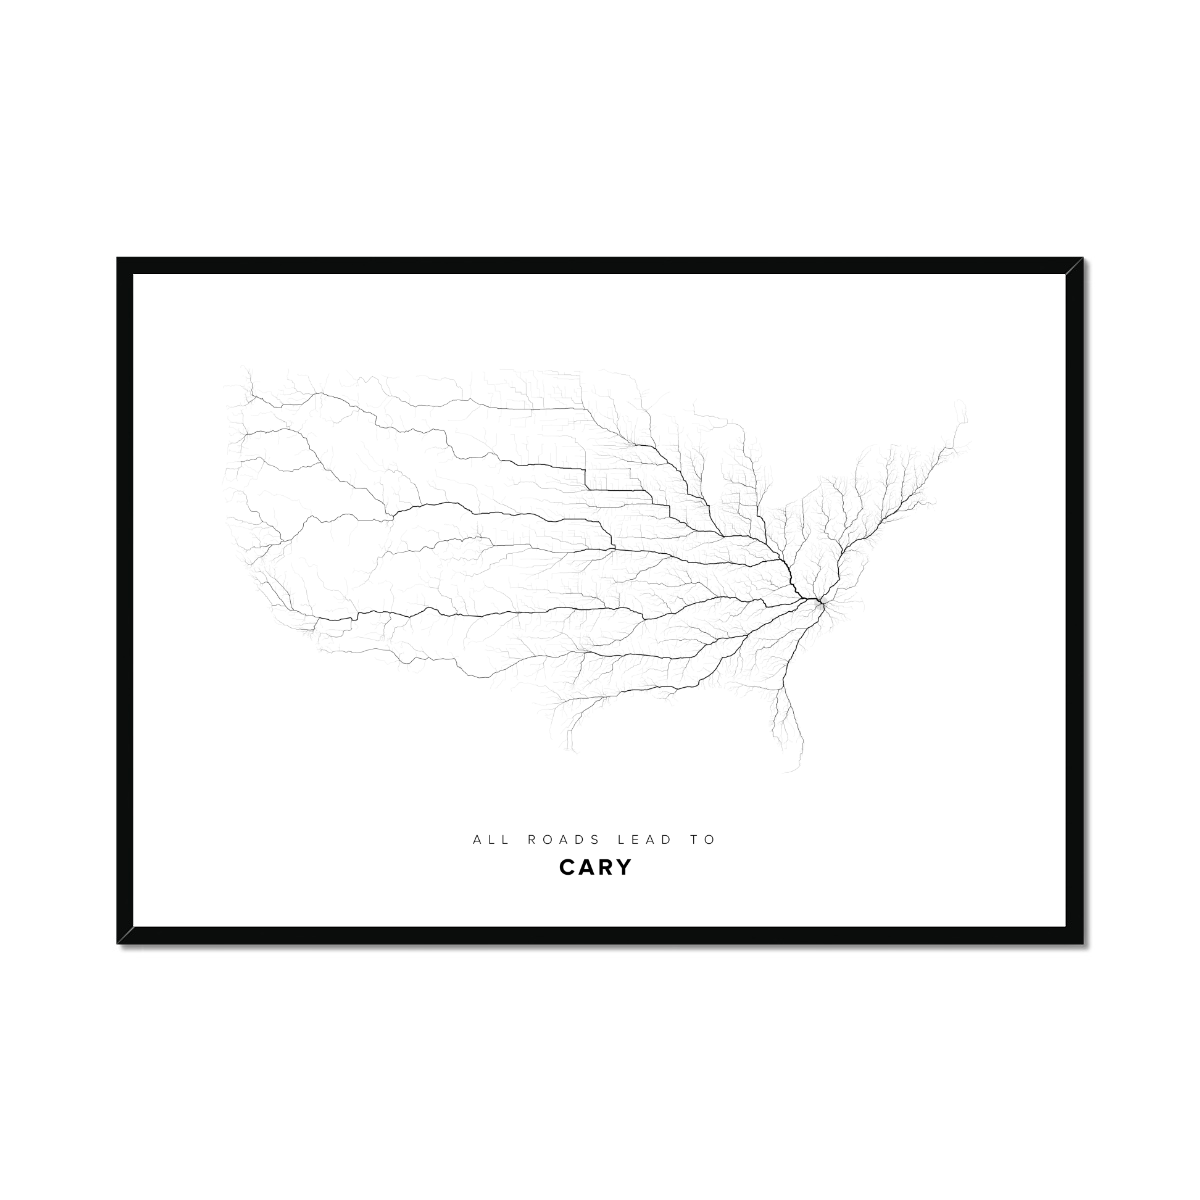 All roads lead to Cary (United States of America) Fine Art Map Print